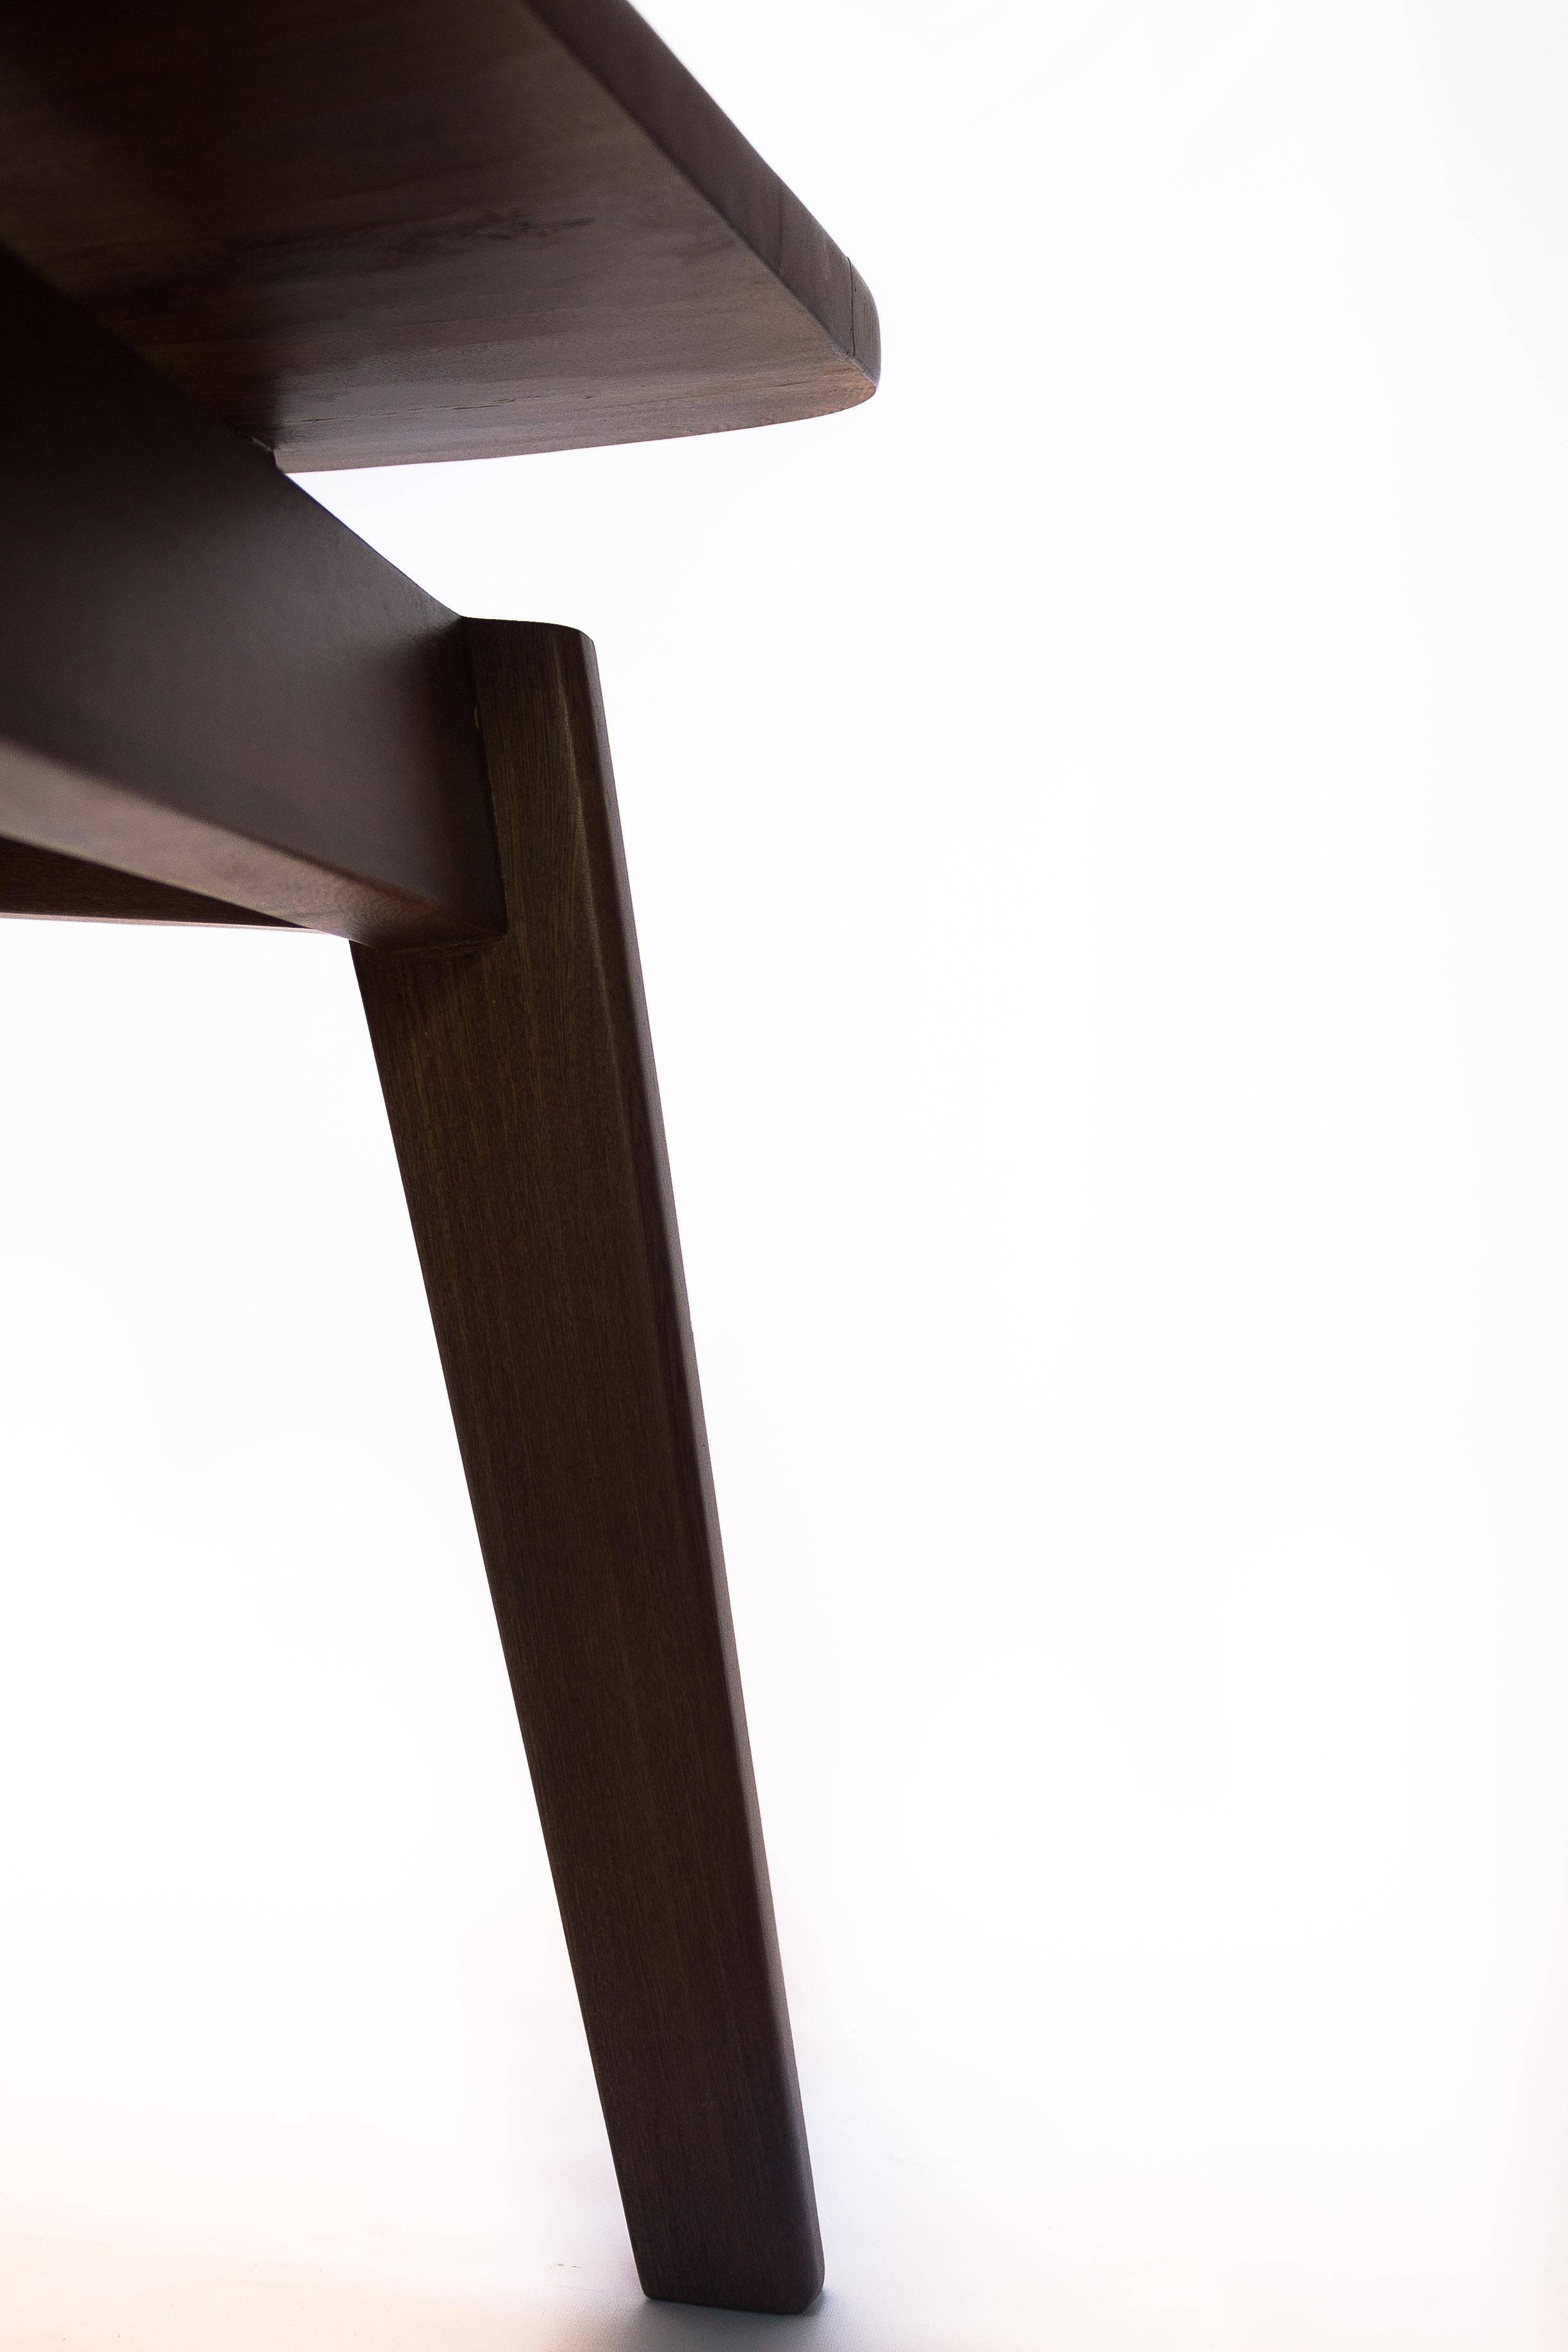 Marques Chair, by Camilo Andres Rodriguez Marquez 1